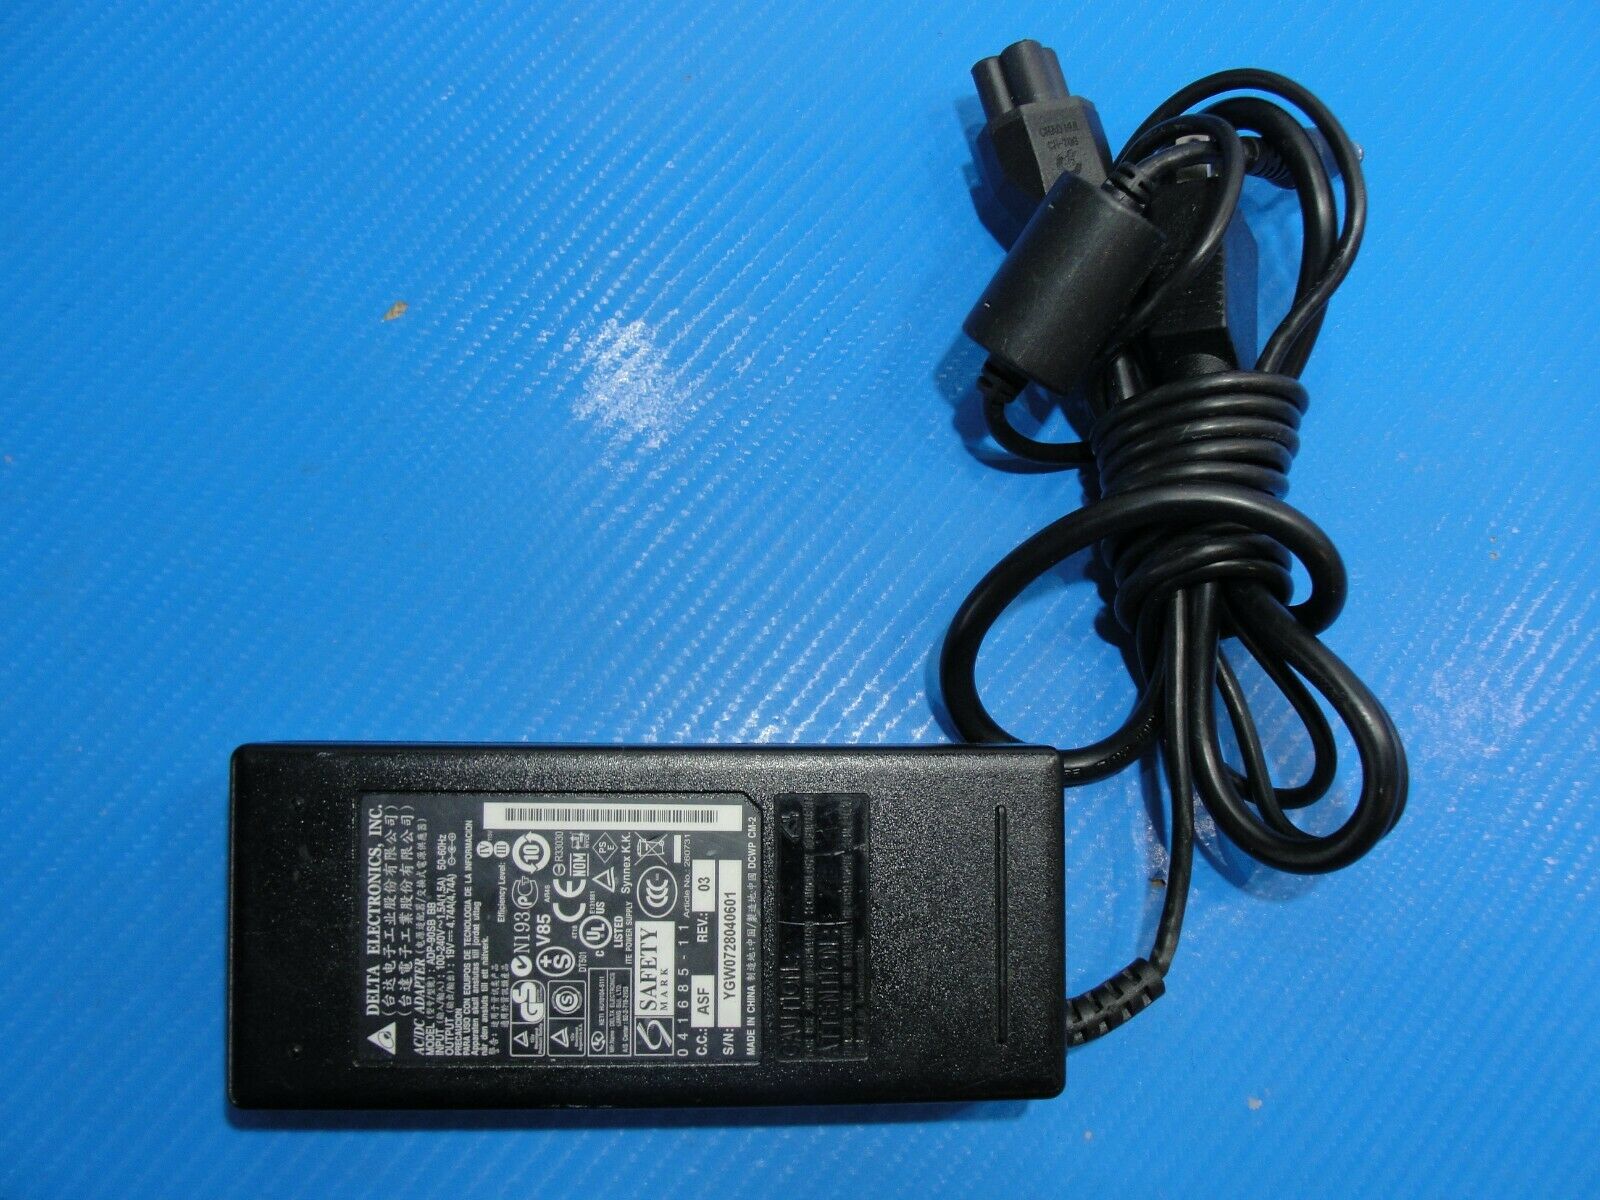 Genuine Asus Laptop Charger AC Adapter Power Supply ADP-90SB BB 19V 4.74A 90W - Laptop Parts - Buy Authentic Computer Parts - Top Seller Ebay